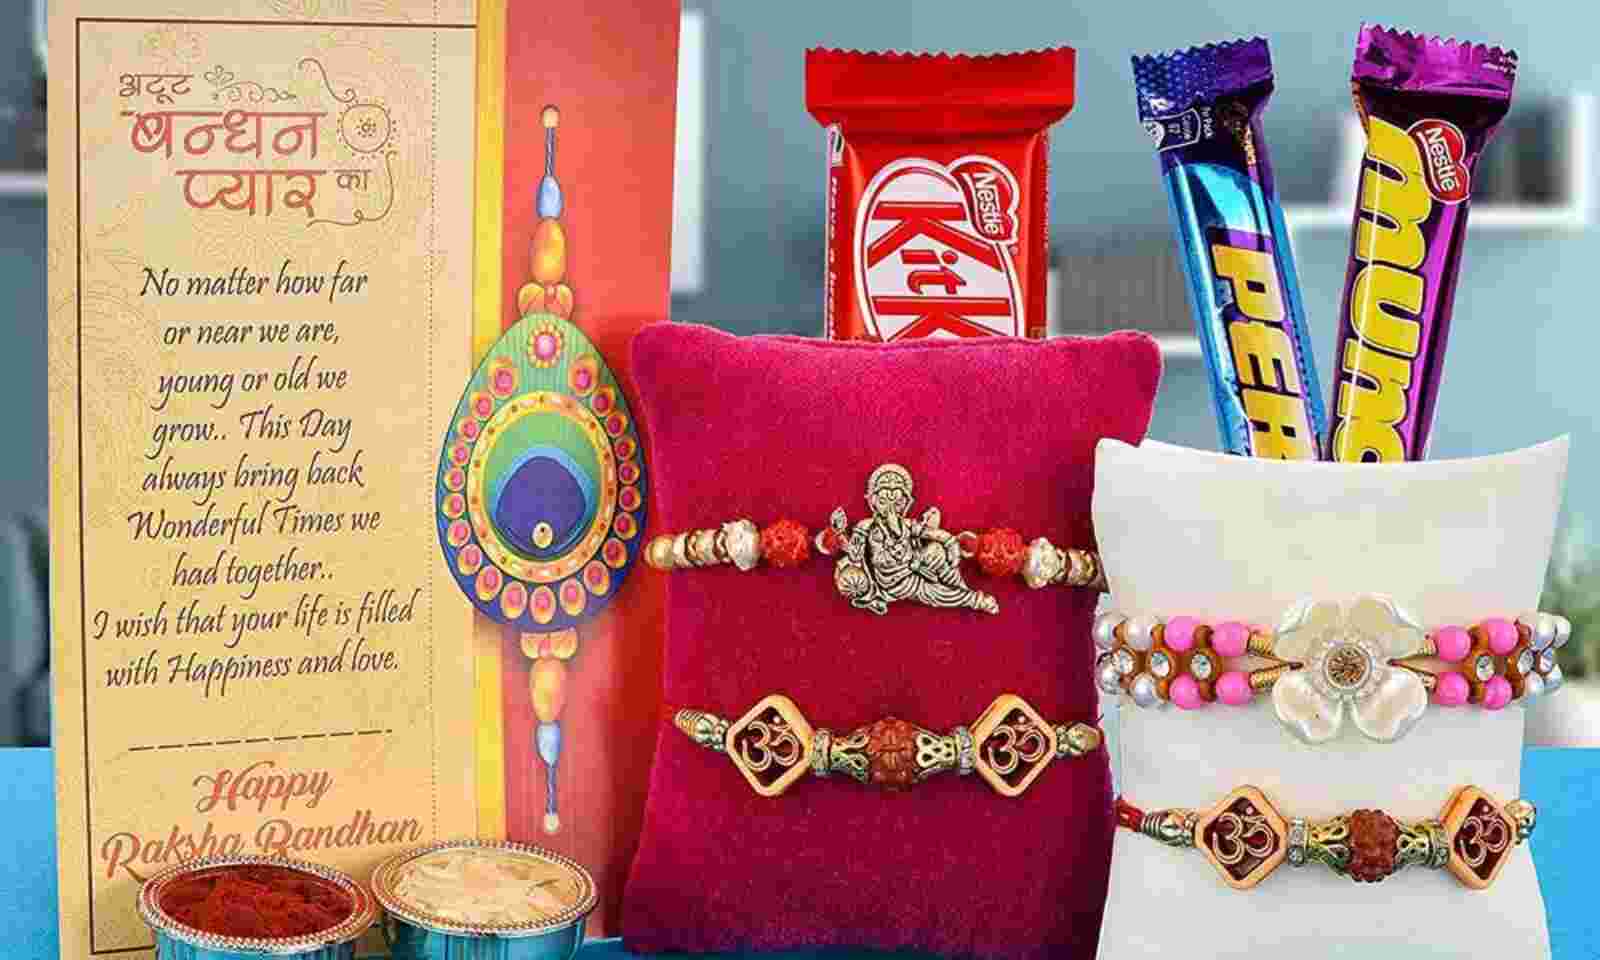 Raksha Bandhan 2021 : Make your sibling feel special with these gifts. Gift  ideas for your sister and brother.